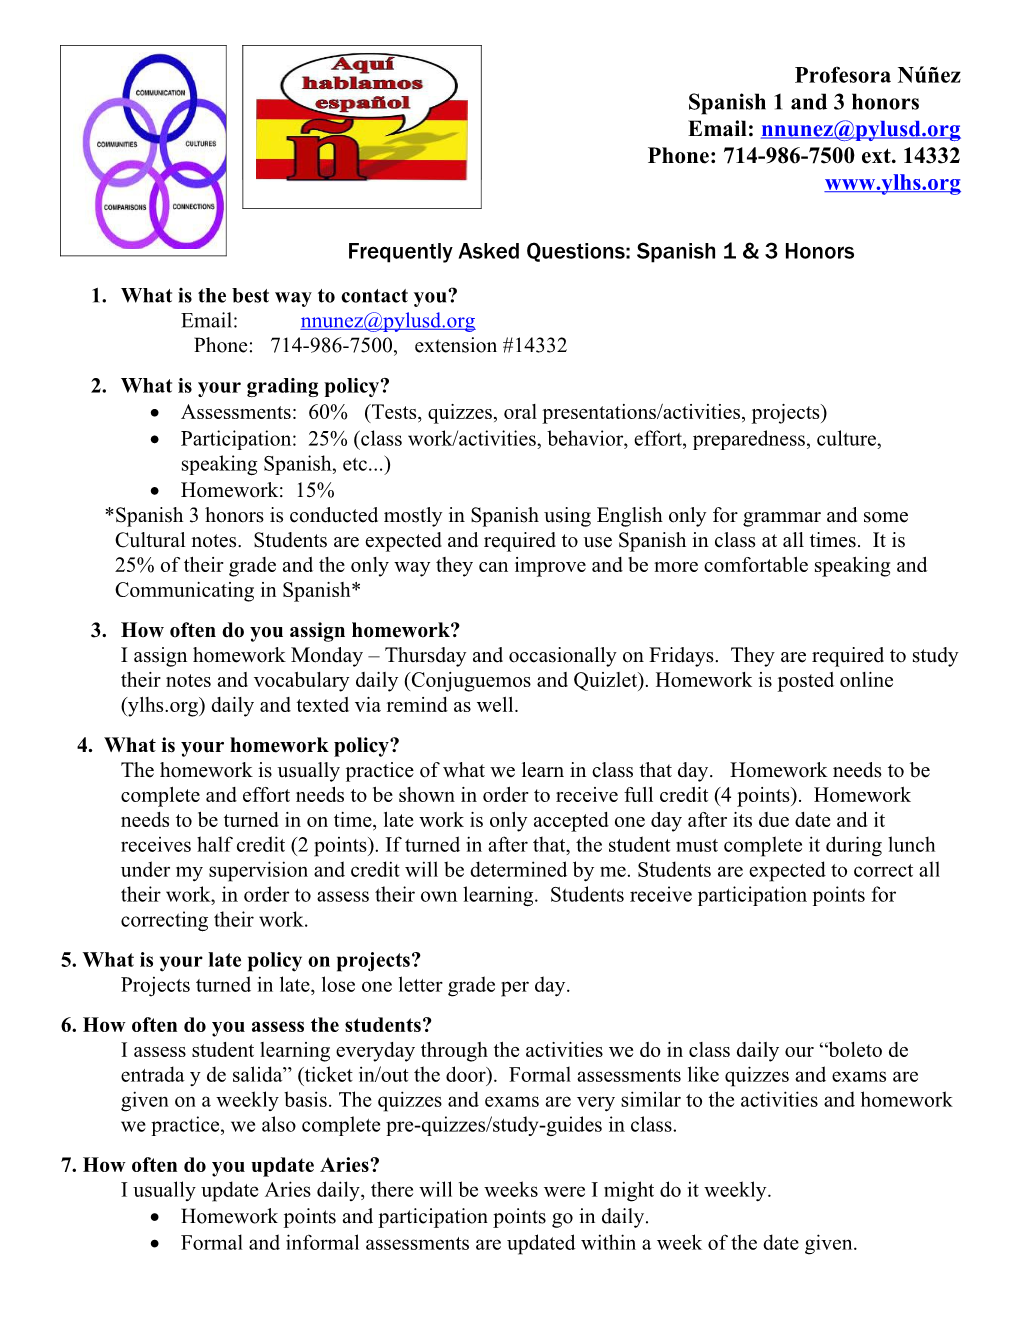 Frequently Asked Questions : Spanish 1 & 3 Honors